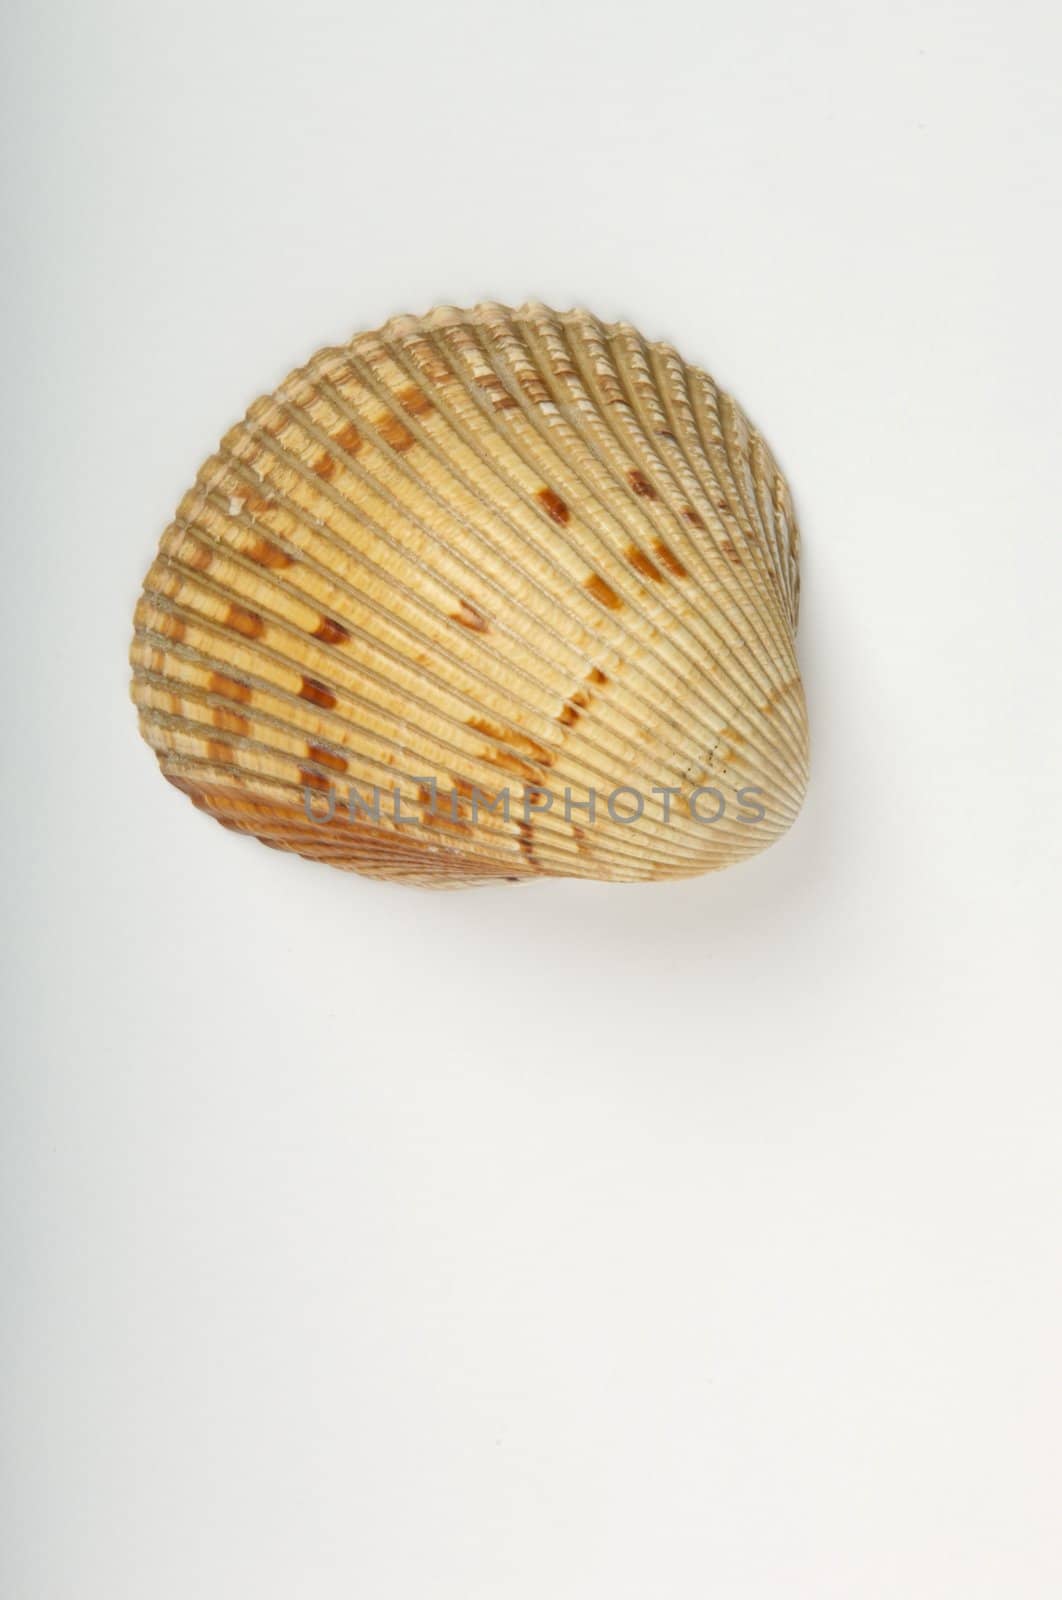 An image of a sea shell with a white background by Deimages